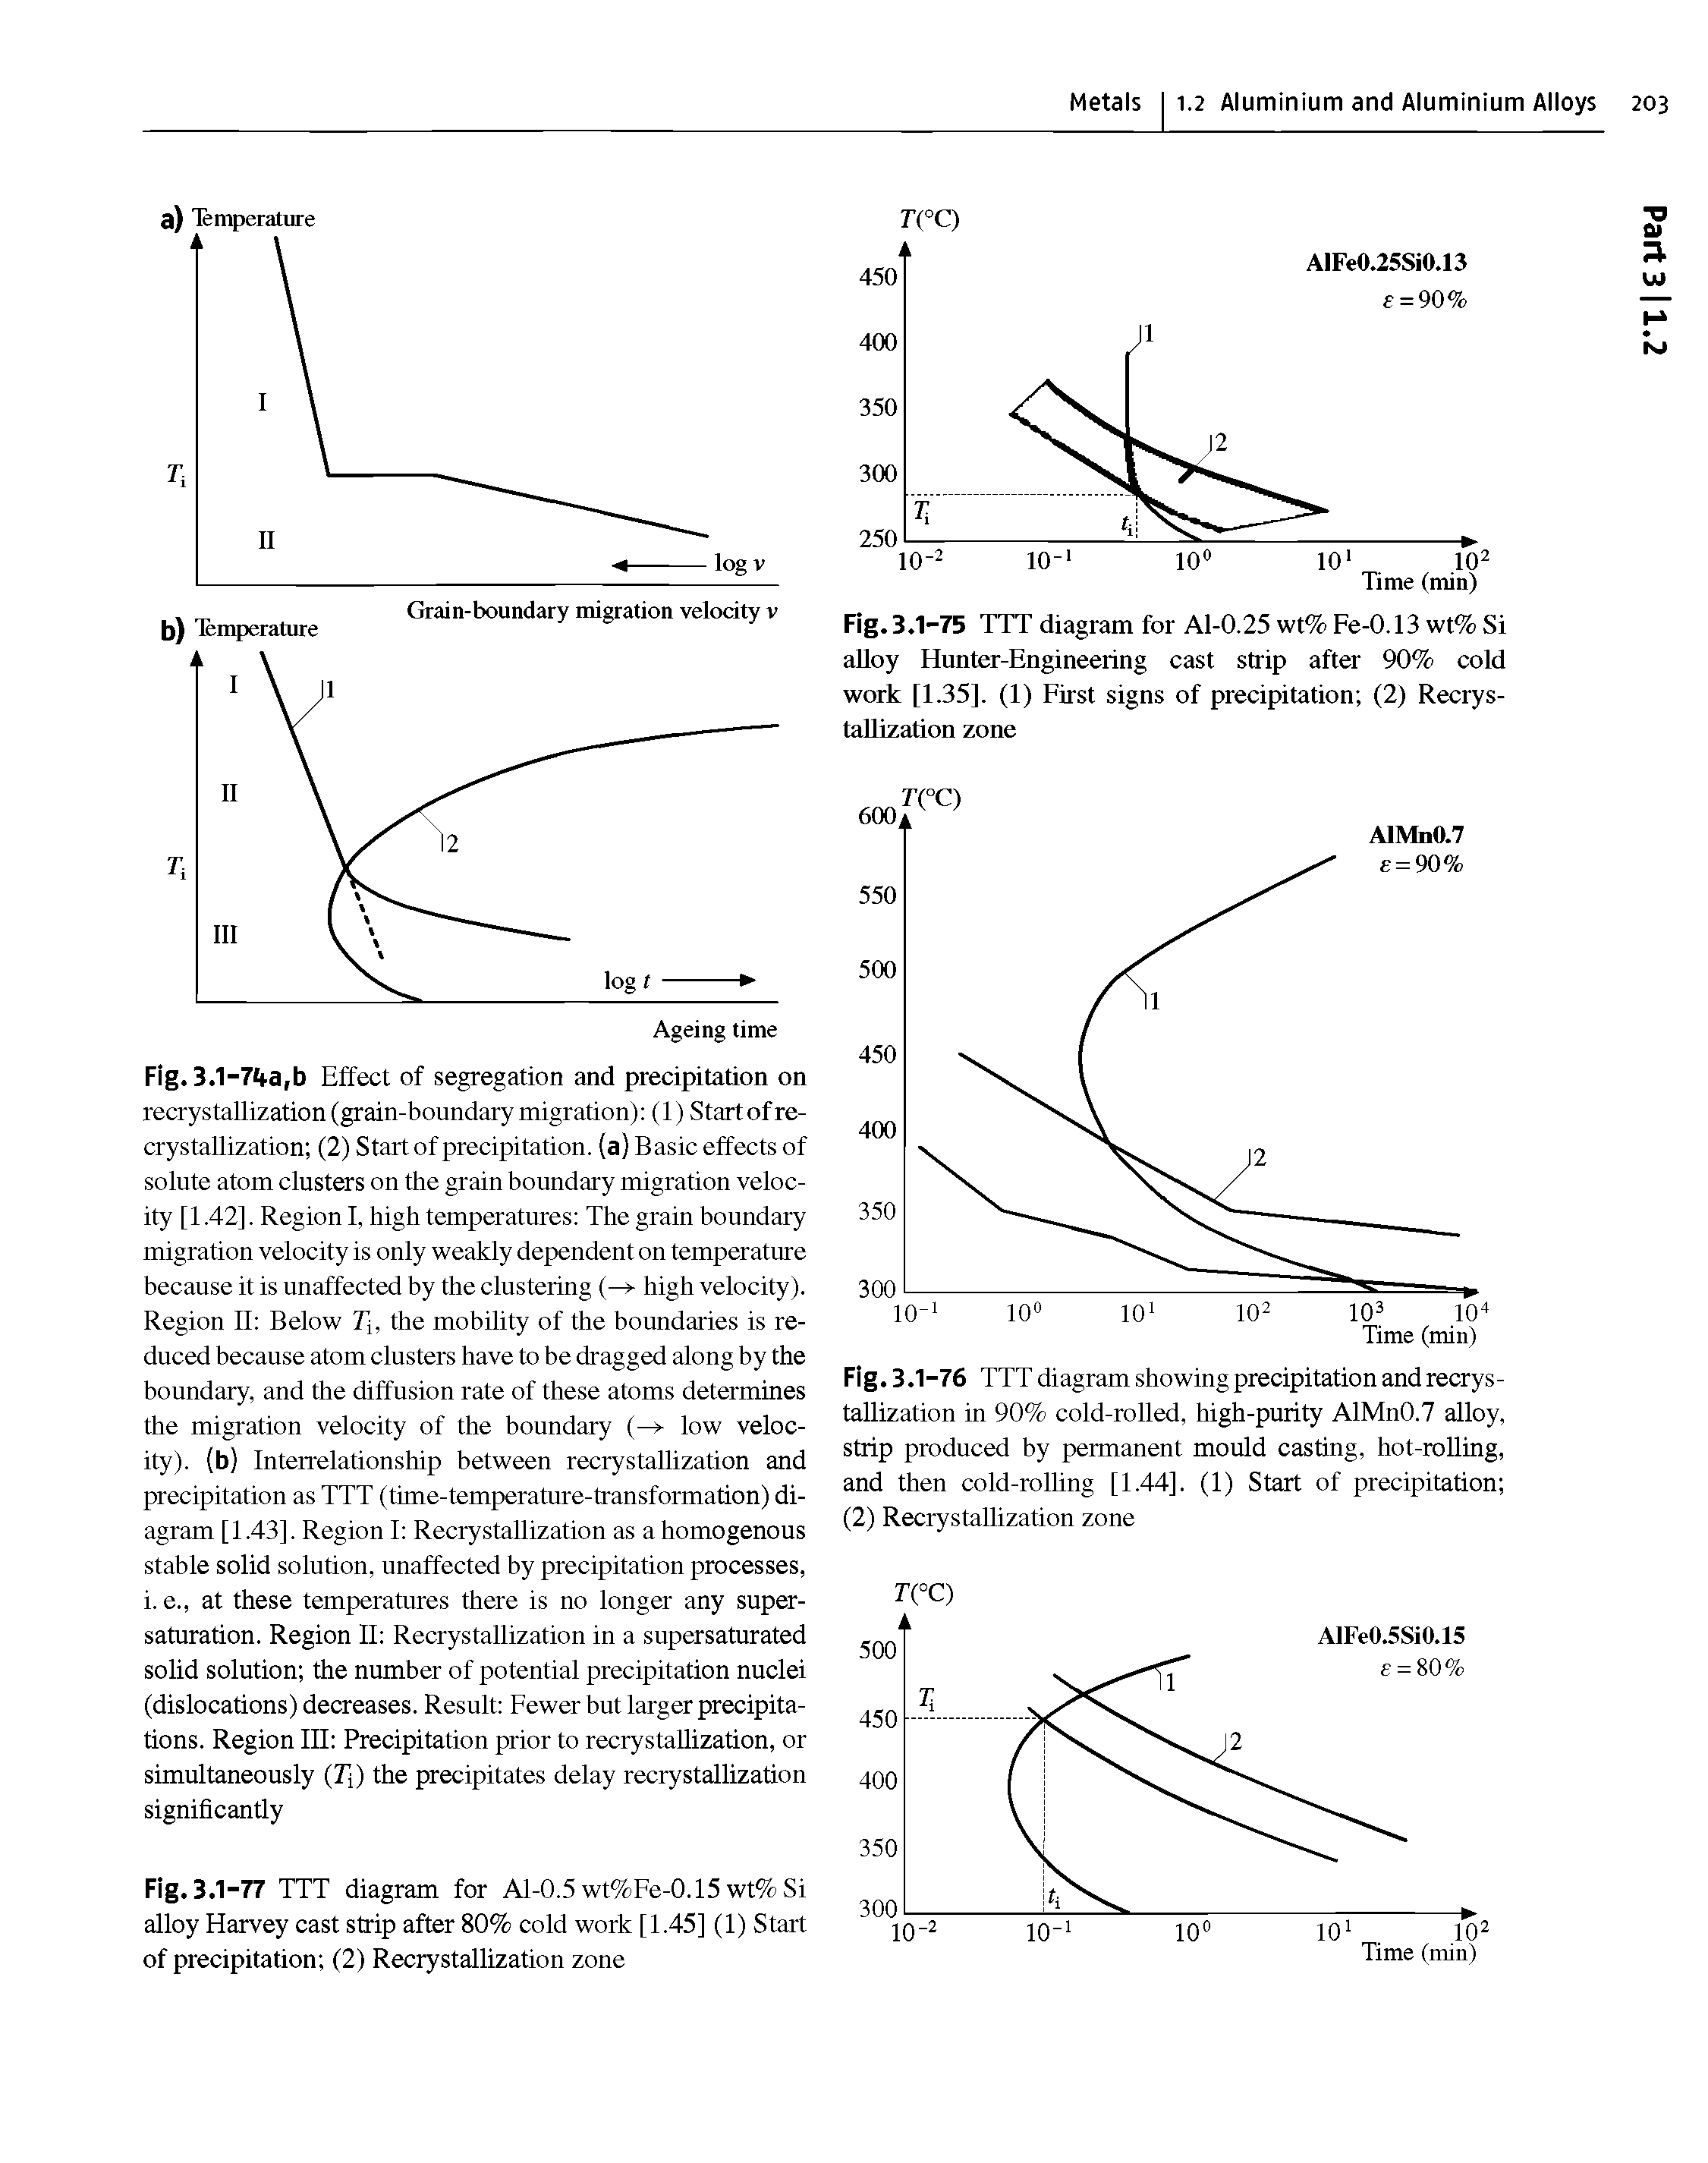 Fig. 3.1-76 TTT diagram showing precipitation and recrys-taUization in 90% cold-roUed, high-purity AlMnO.7 alloy, strip produced by permanent mould casting, hot-rolling, and then cold-roUing [1.44]. (1) Start of precipitation (2) Recrystallization zone...